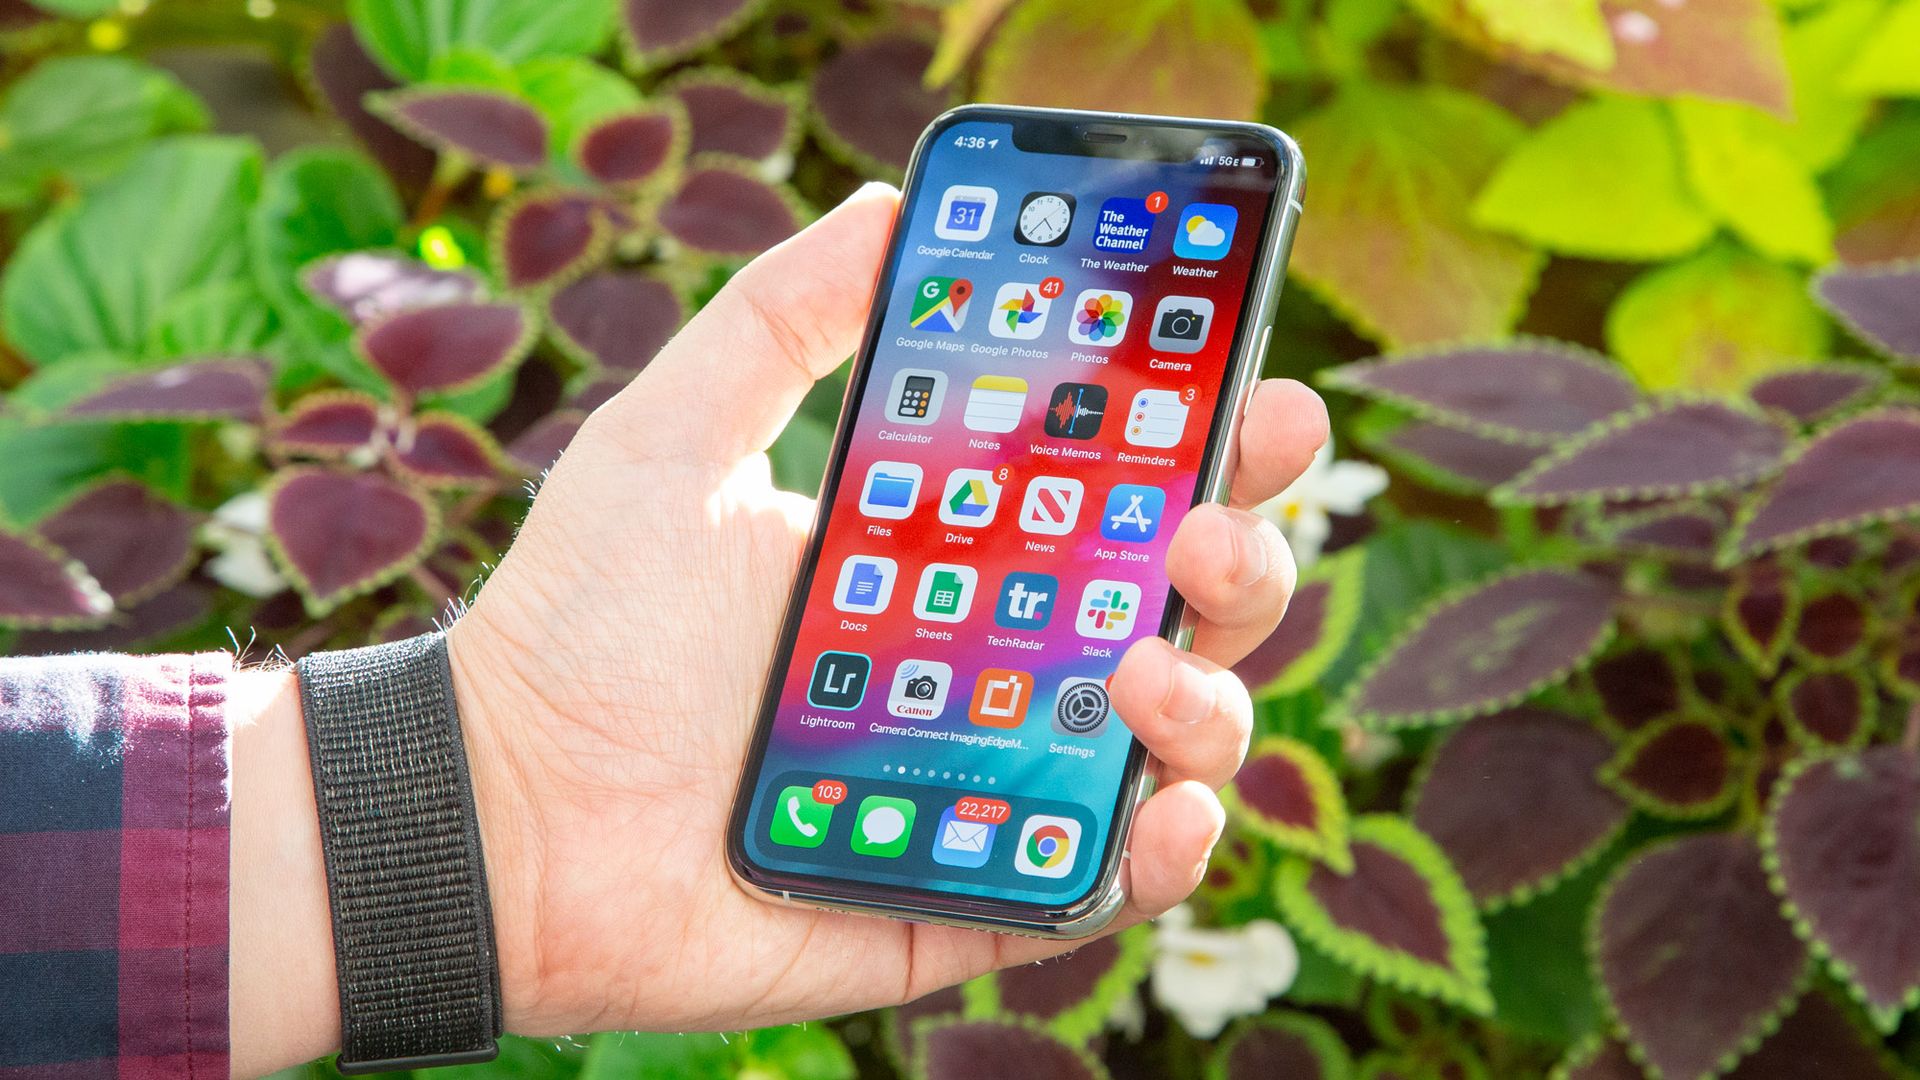 It looks like the iPhone 11 will be discontinued next September here